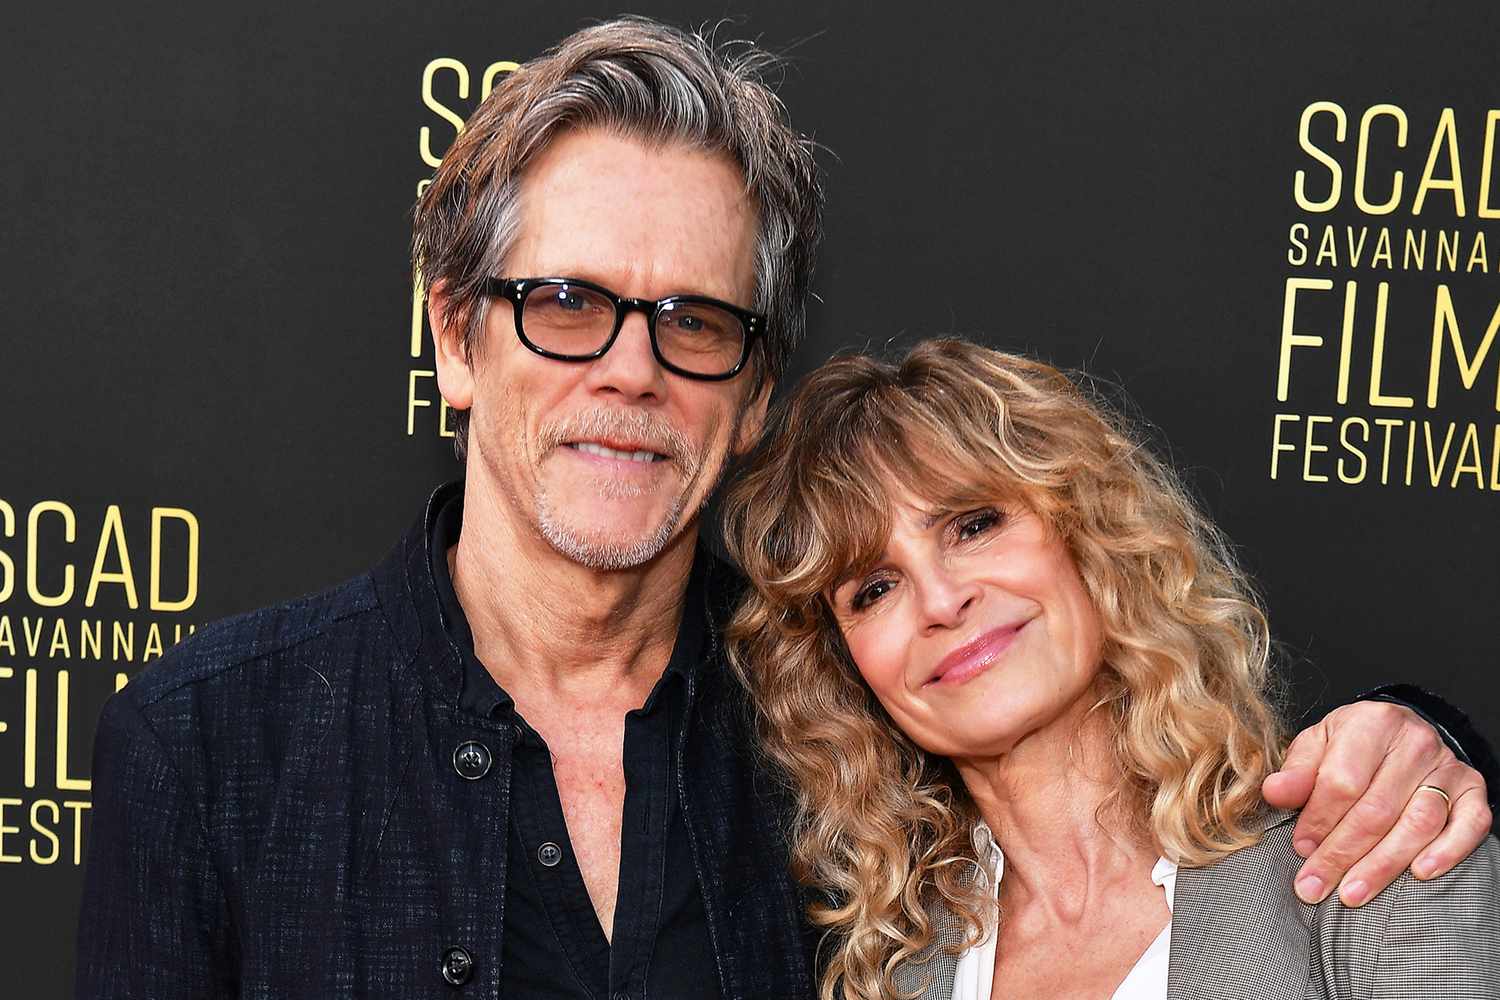 Kevin Bacon reveals a crew member covered his trailer with photos of Kyra Sedgwick